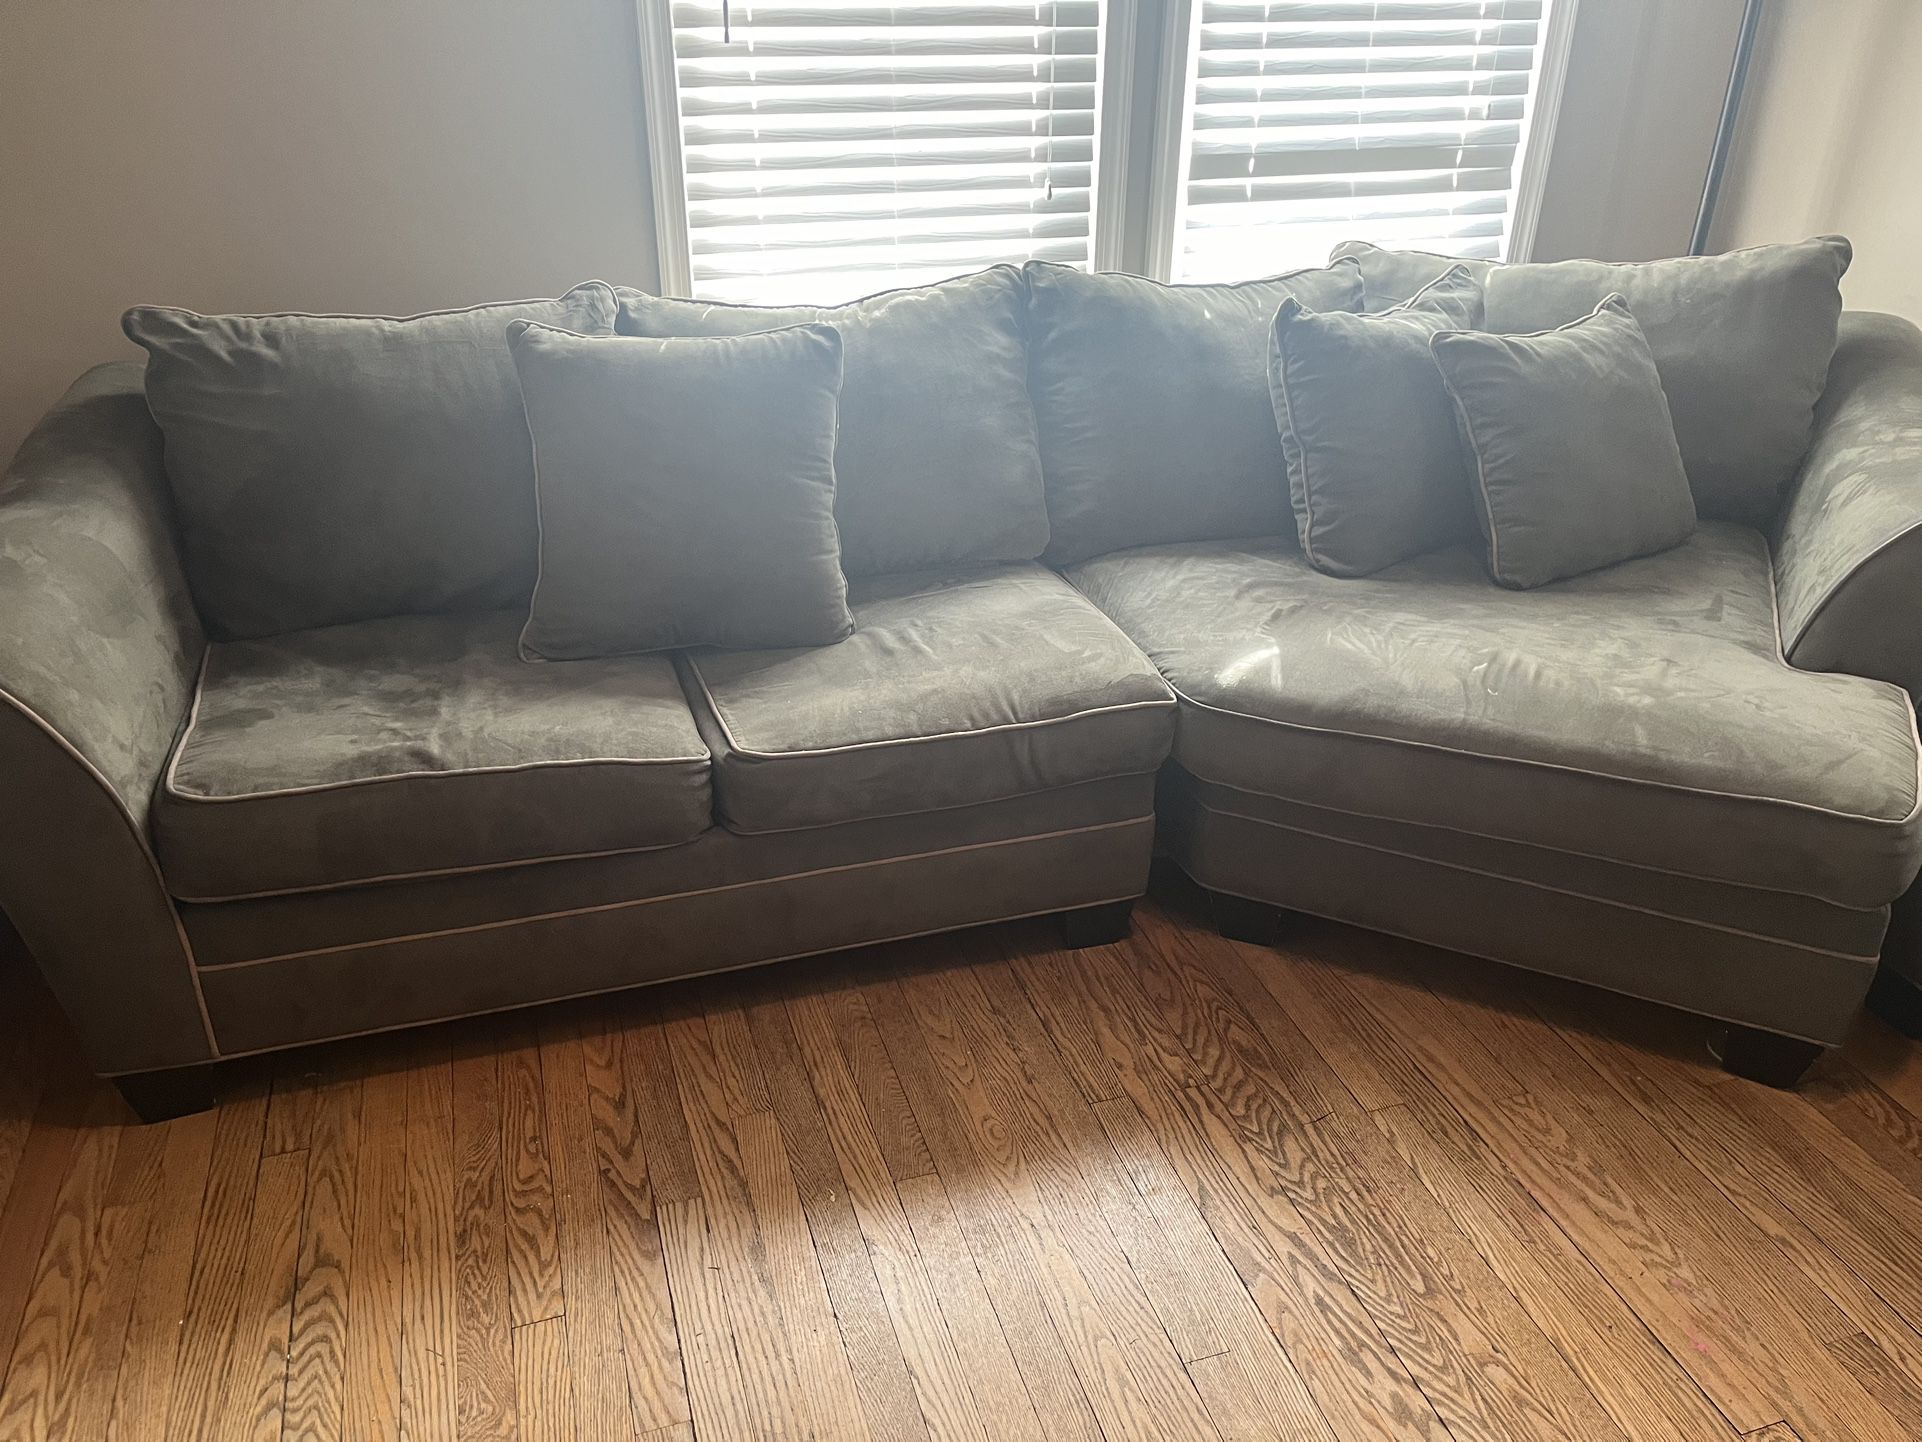 2 Piece Extra Comfy Sectional For Sale ! $ 350 OBO